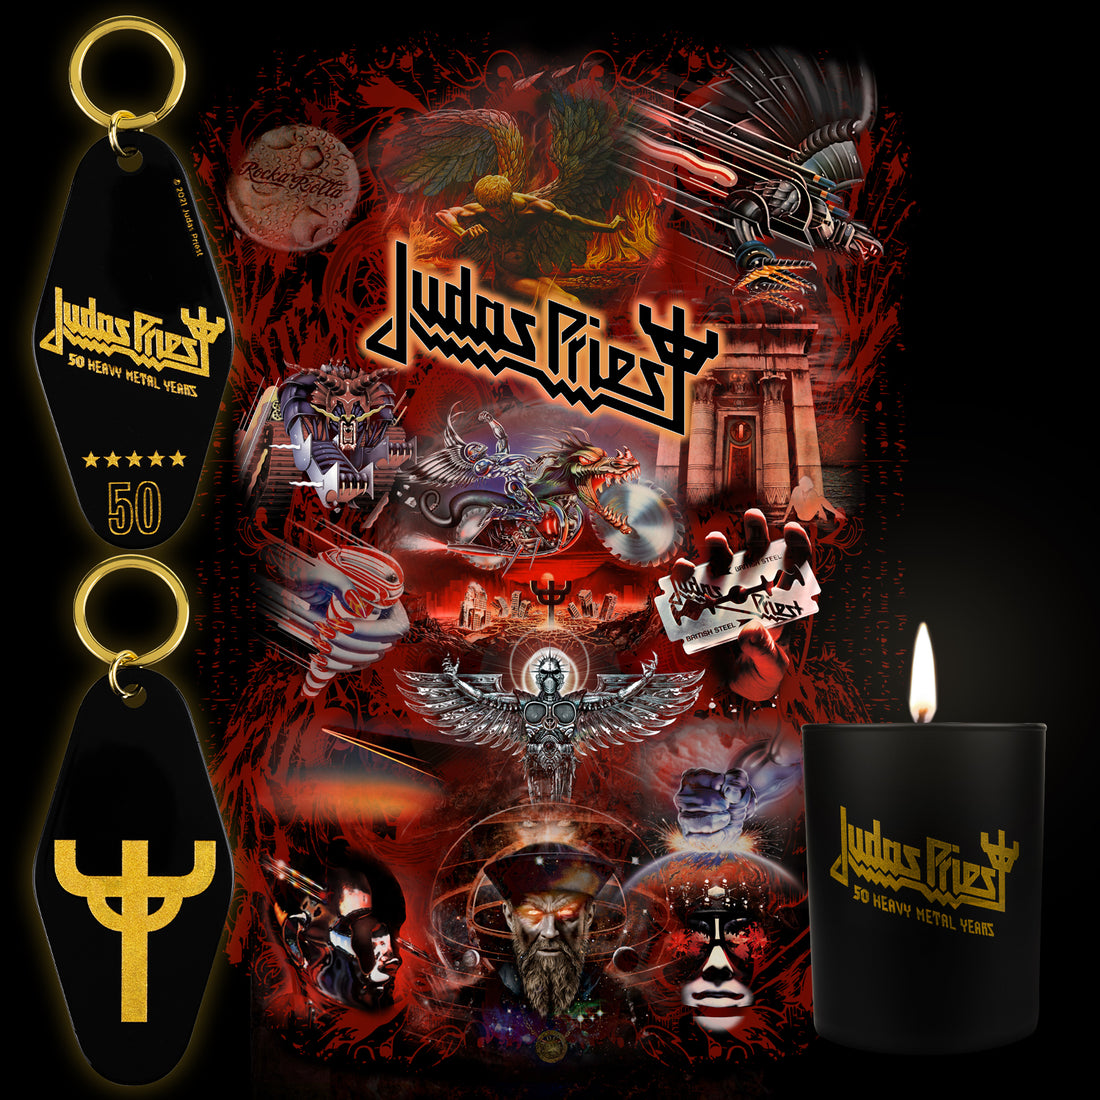 THE REVIEWS ARE IN!!!! - Judas Priest 50 Heavy Metal Years